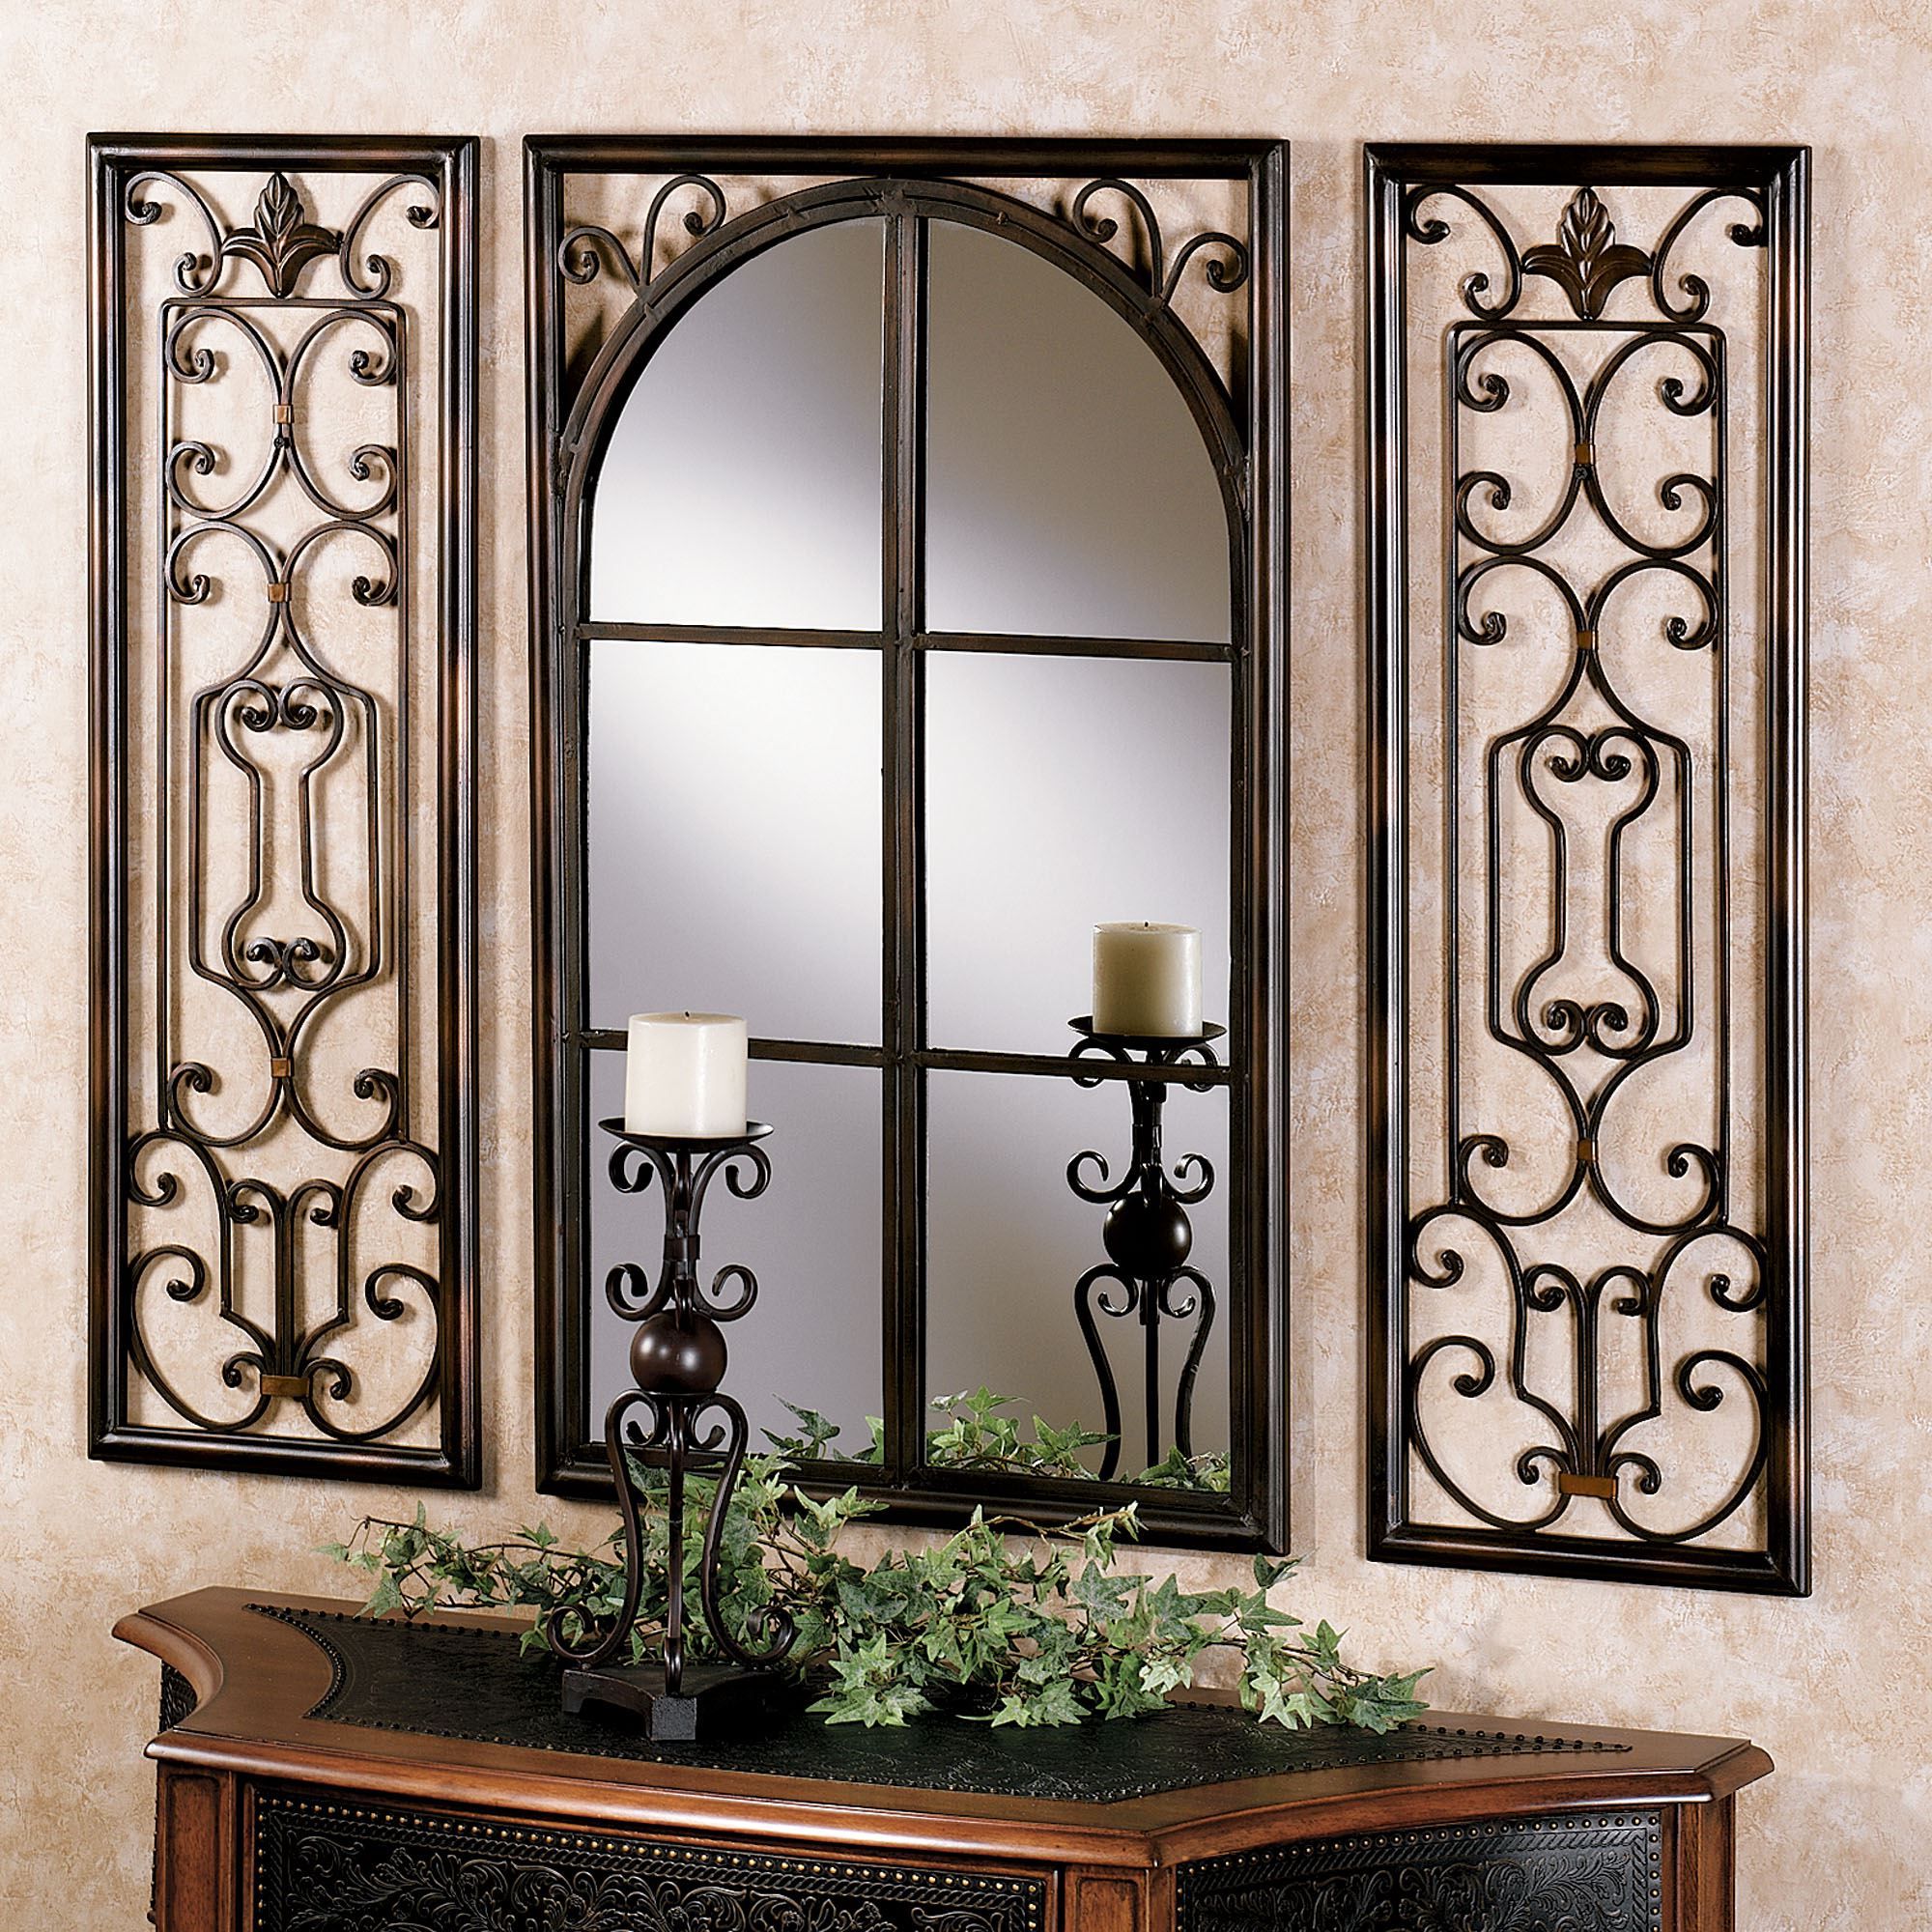 20 Collection of Iron Wall Mirrors